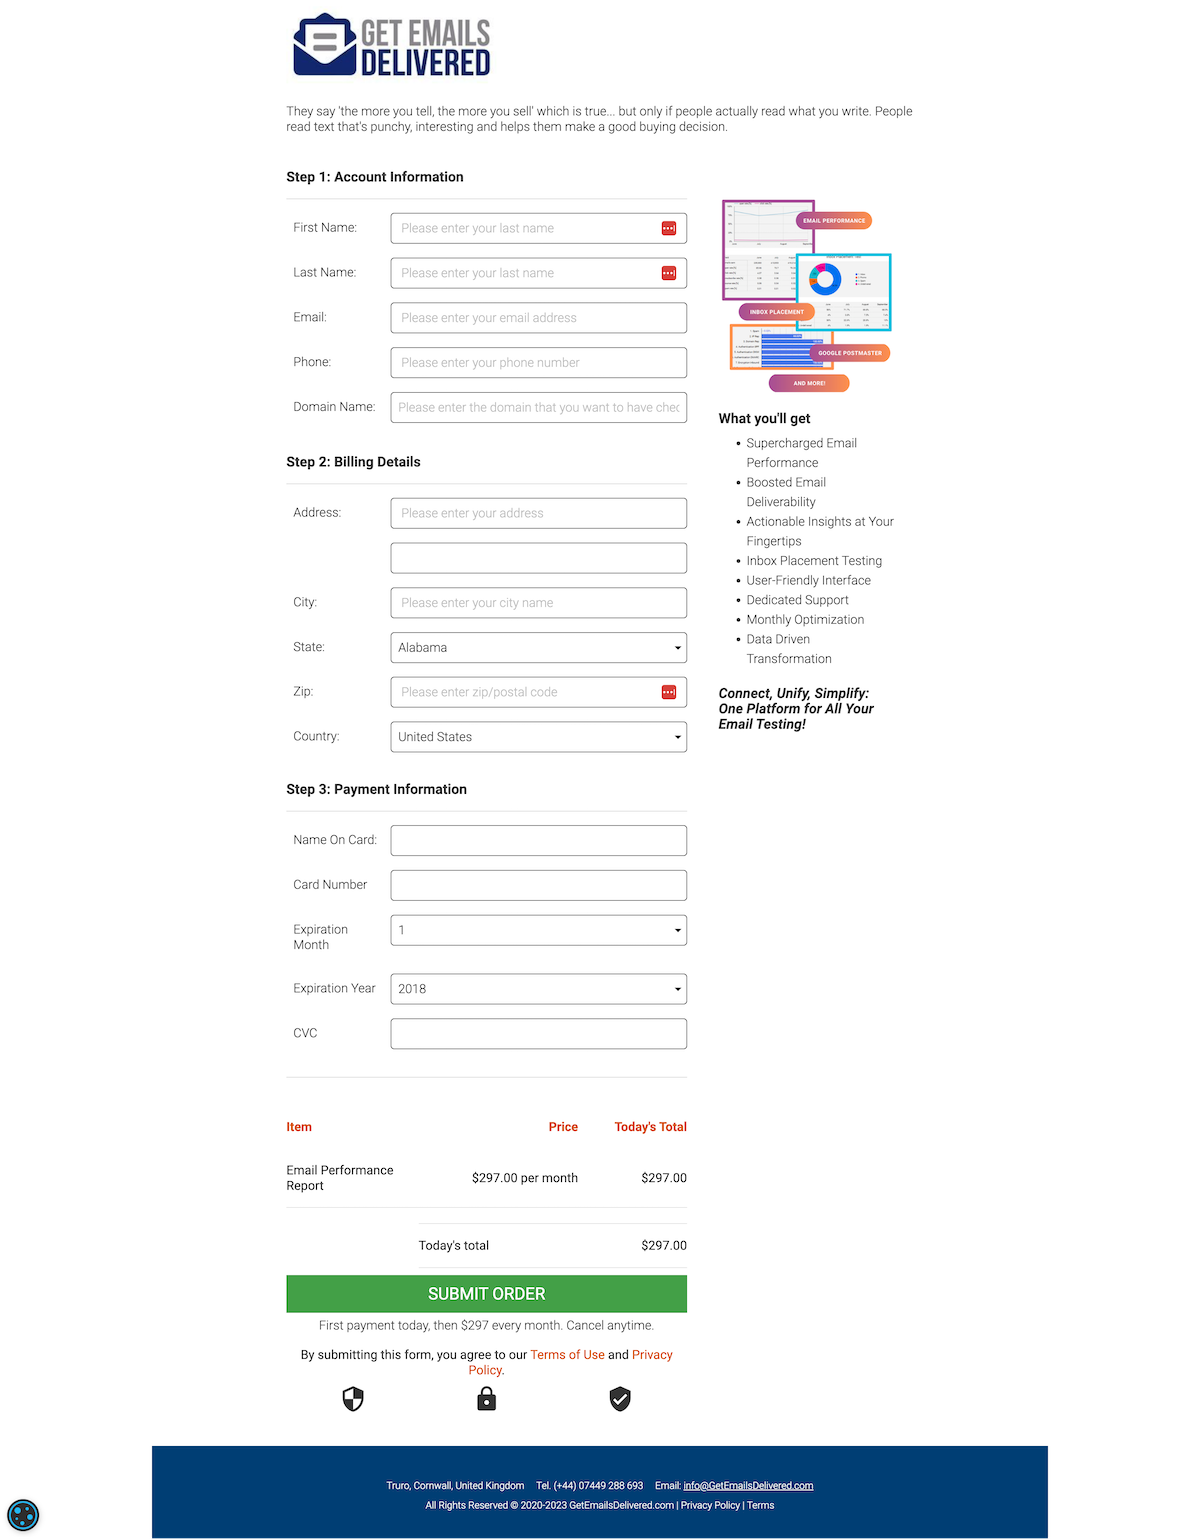 Email Performance Report Checkout Form